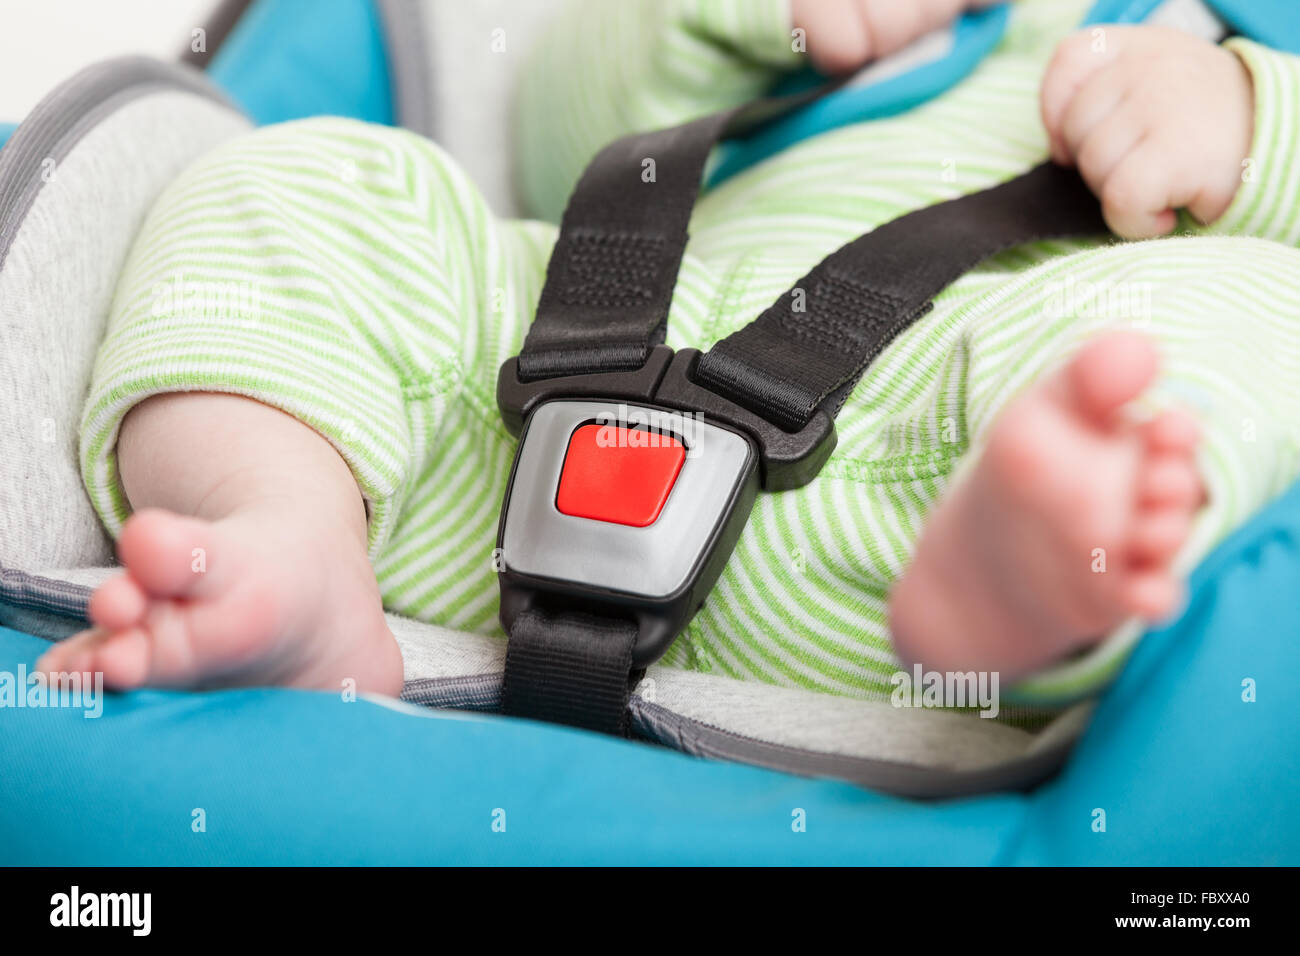 Little baby child in safety car seat Stock Photo